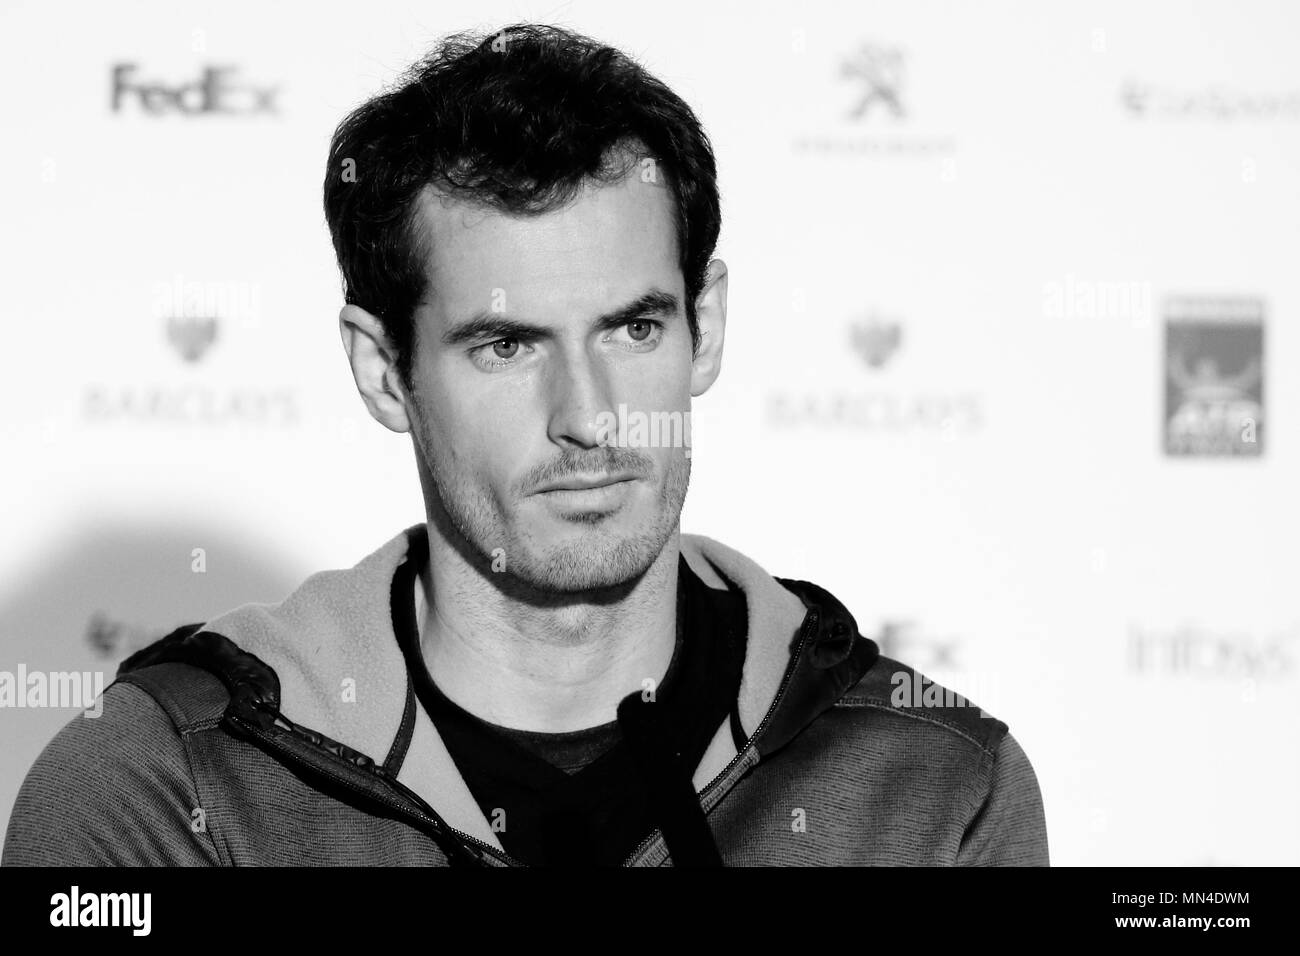 LONDON, ENGLAND - NOVEMBER 18: (Editors Note: Image Converted to Black and White) Andy Murray of Great Britain at a press conference after his victory against Stan Wawrinka of Switzerland on day six of the ATP World Tour Finals at the O2 Arena on November 18, 2016 in London, England. Stock Photo